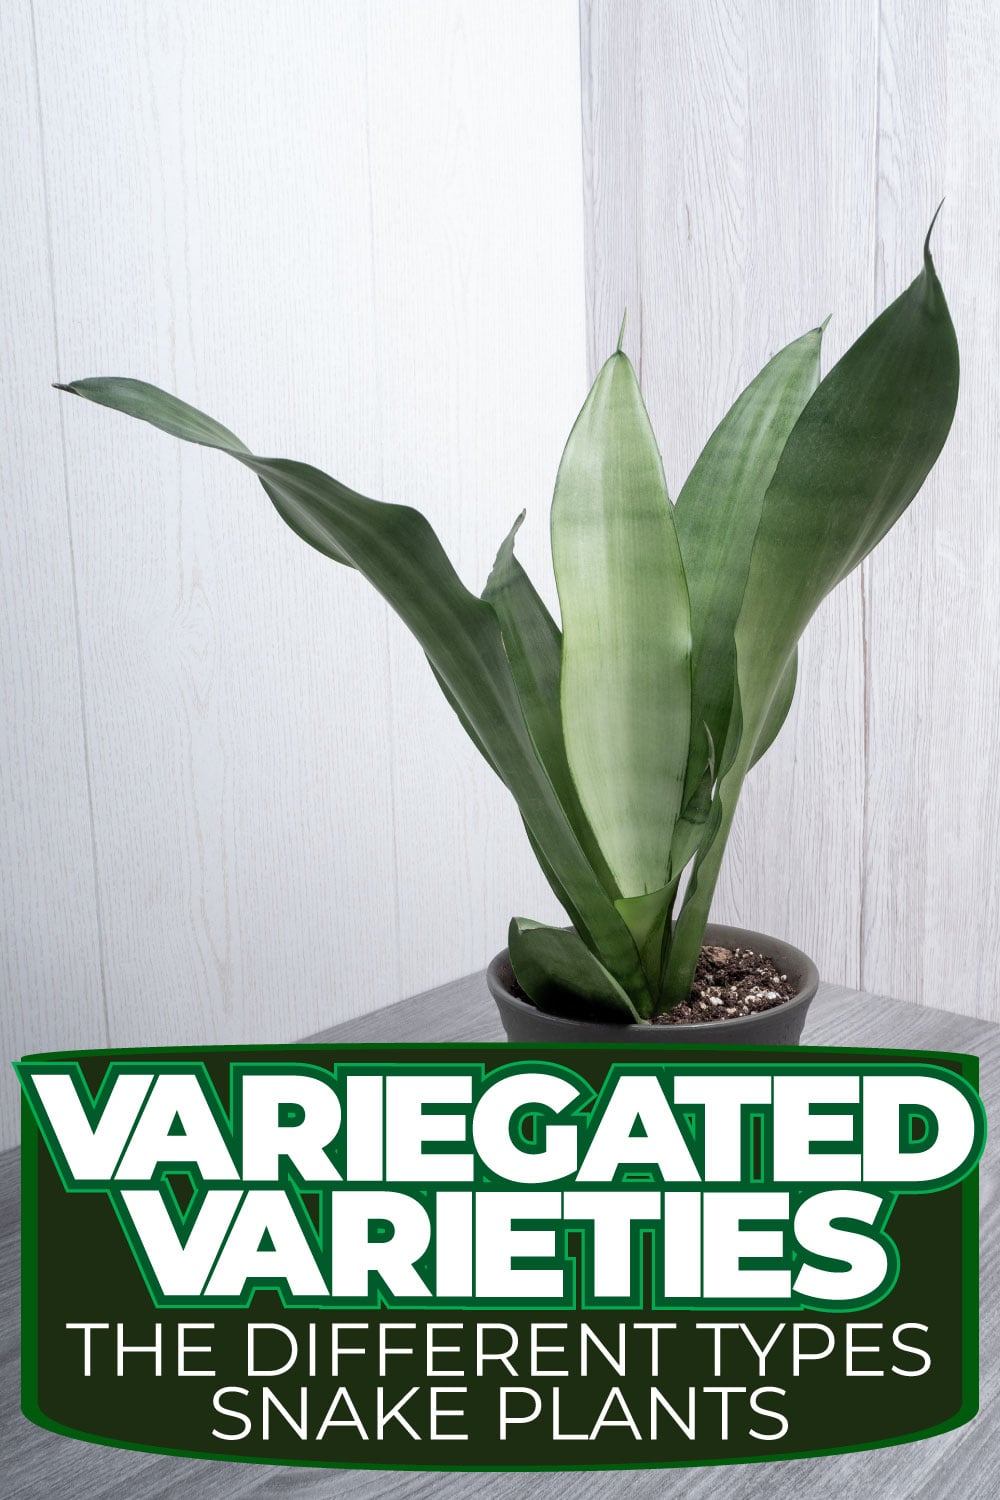 Variegated Varieties The Different Types of Snake Plants